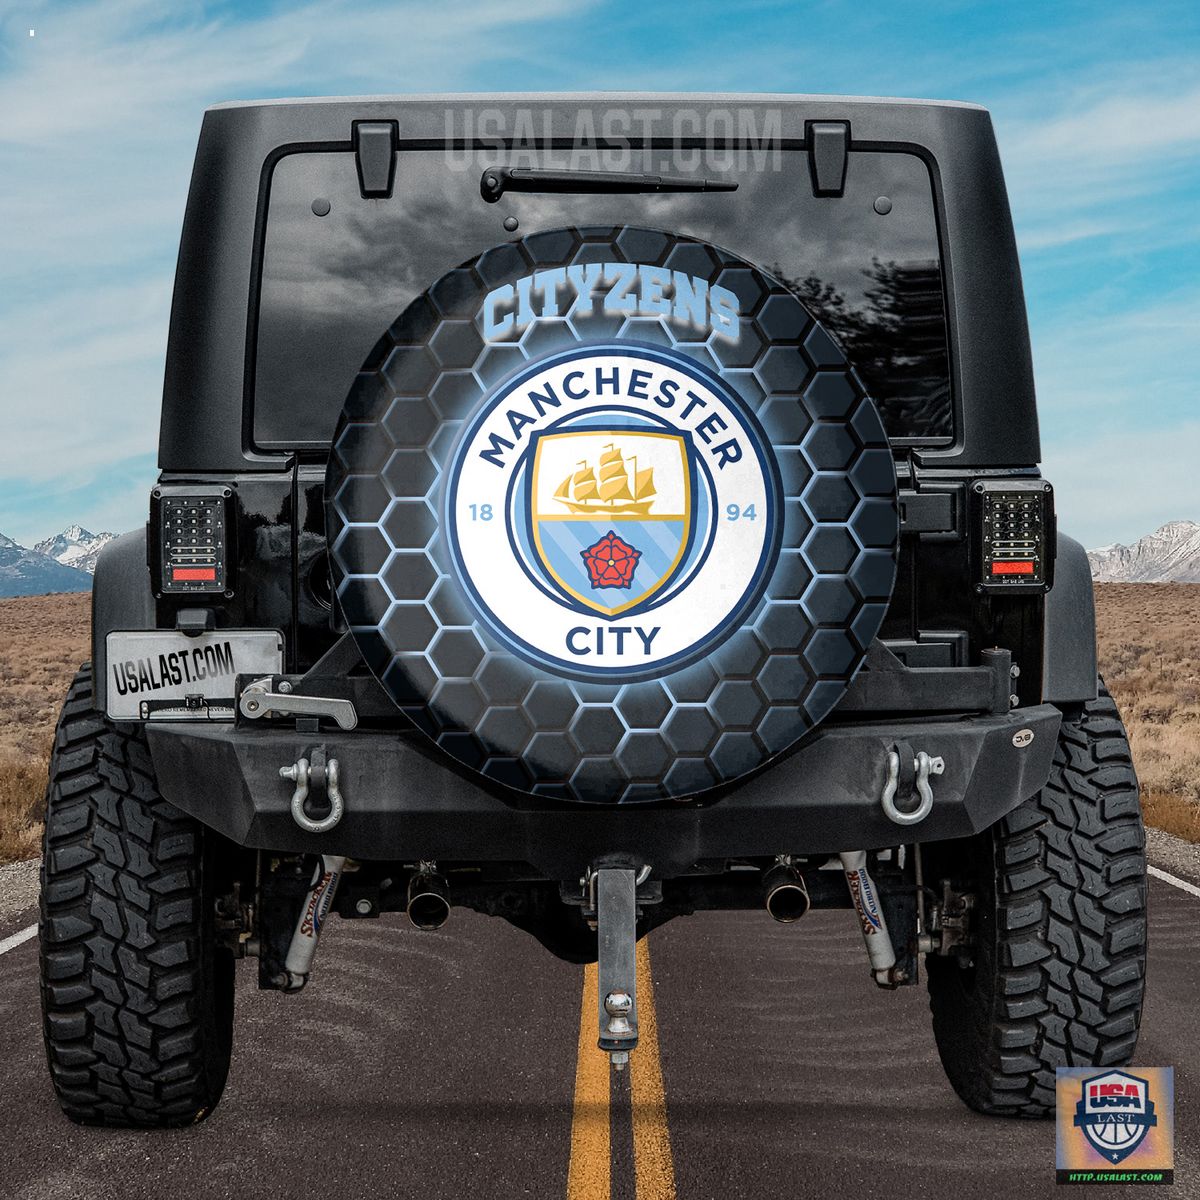 AMAZING Manchester City FC Spare Tire Cover